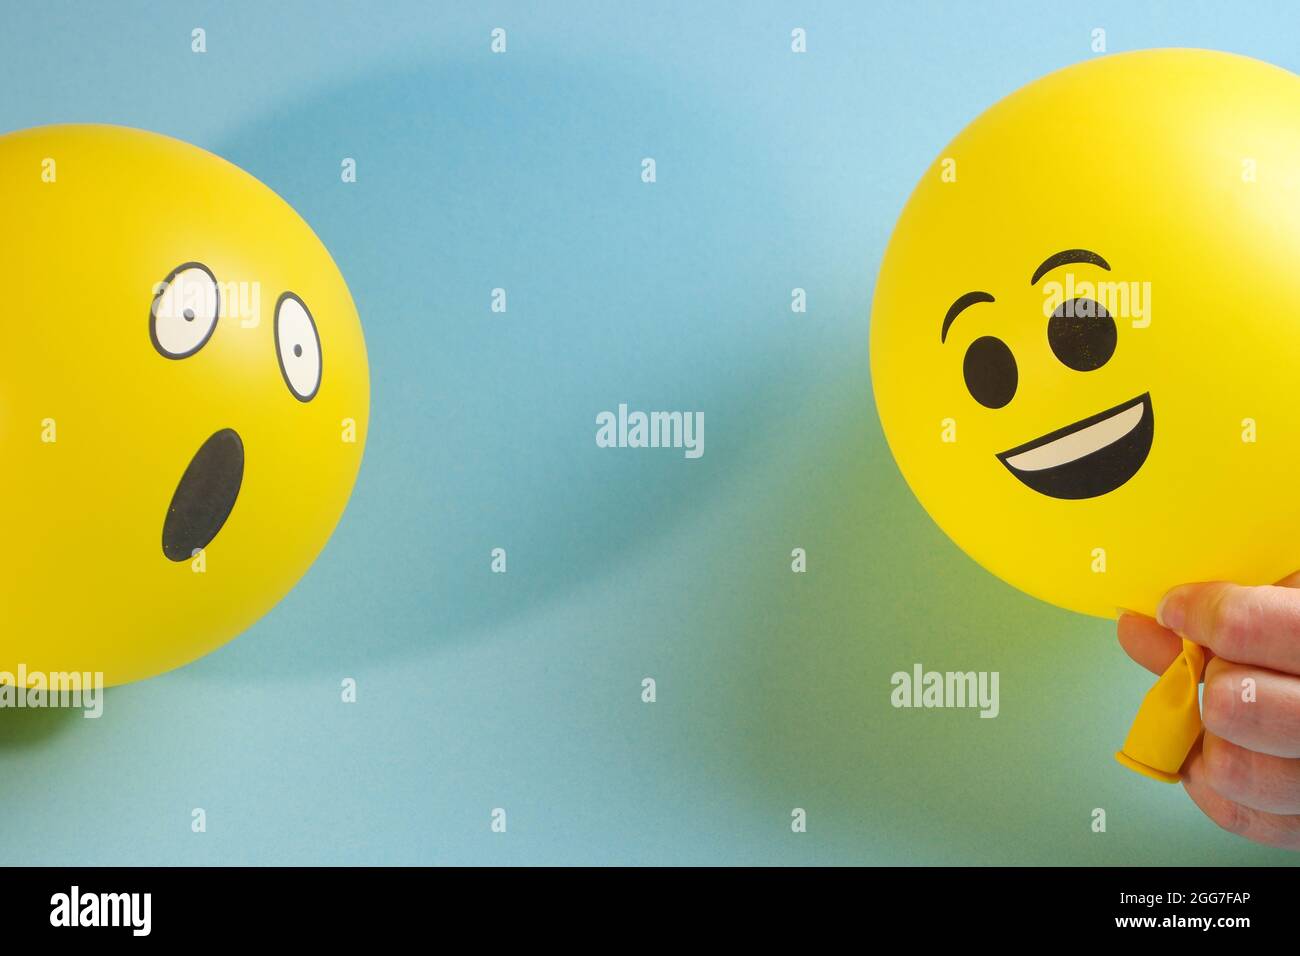 Yellow emoji balloons on a blue background. Stock Photo